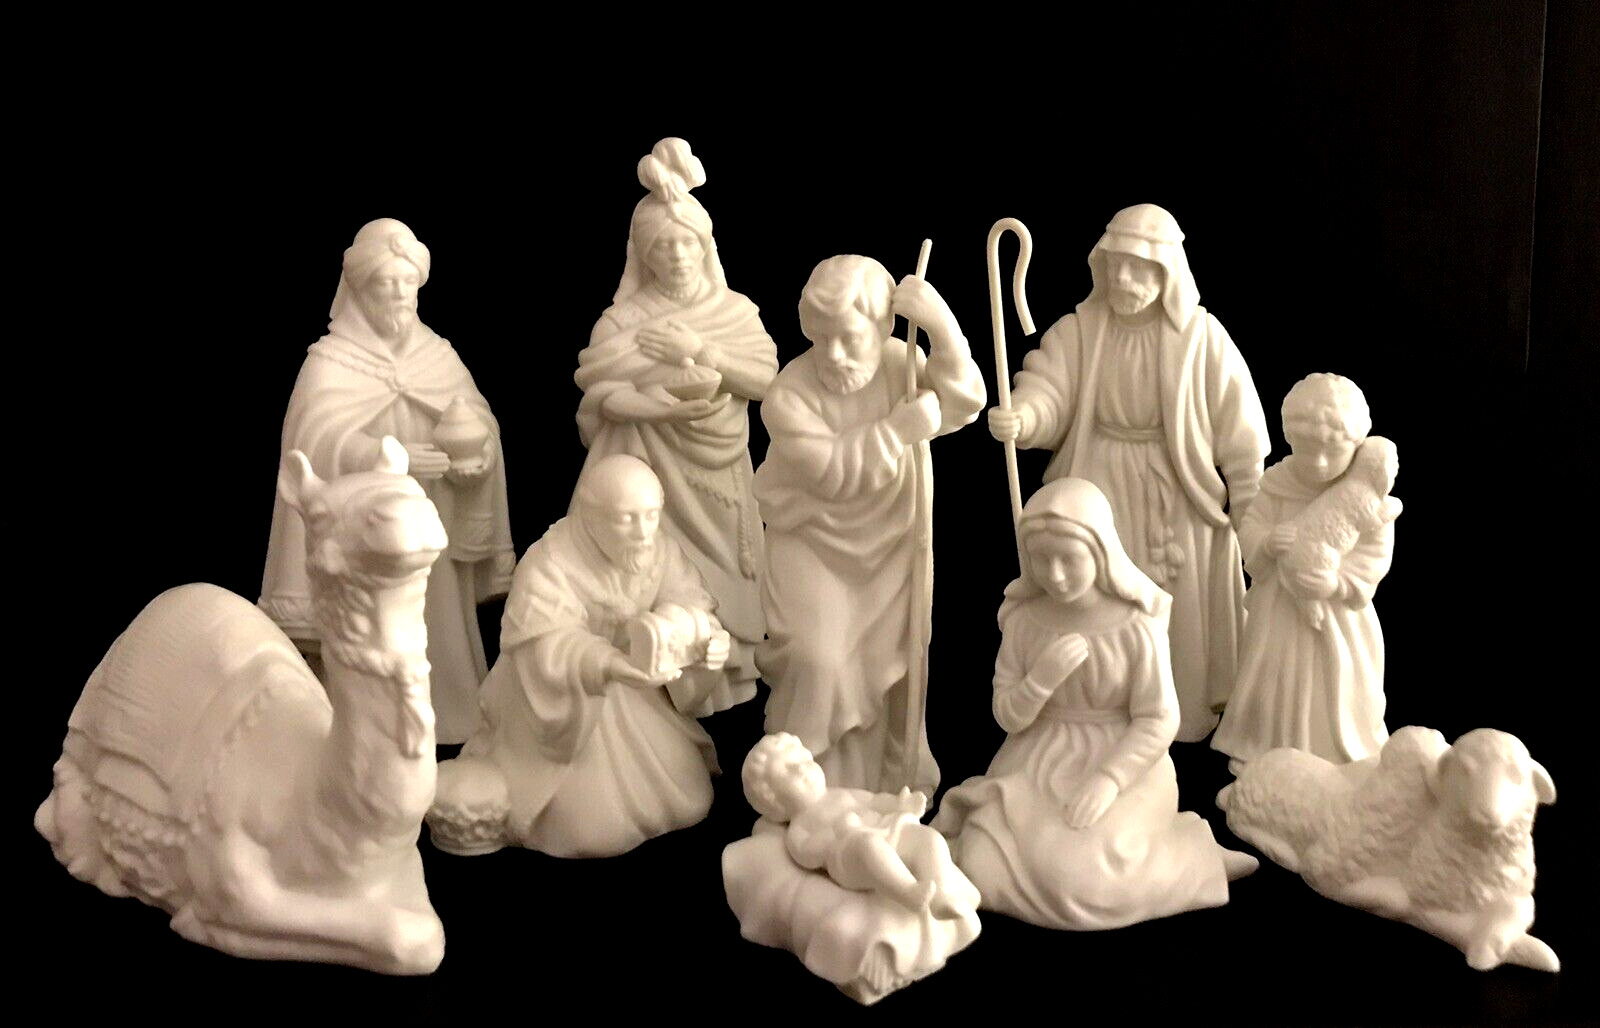 AVON NATIVITY COLLECTIBLES - 10pc - ALL BOXES, FOAM INSERTS - 1982-84 - CLASSIC